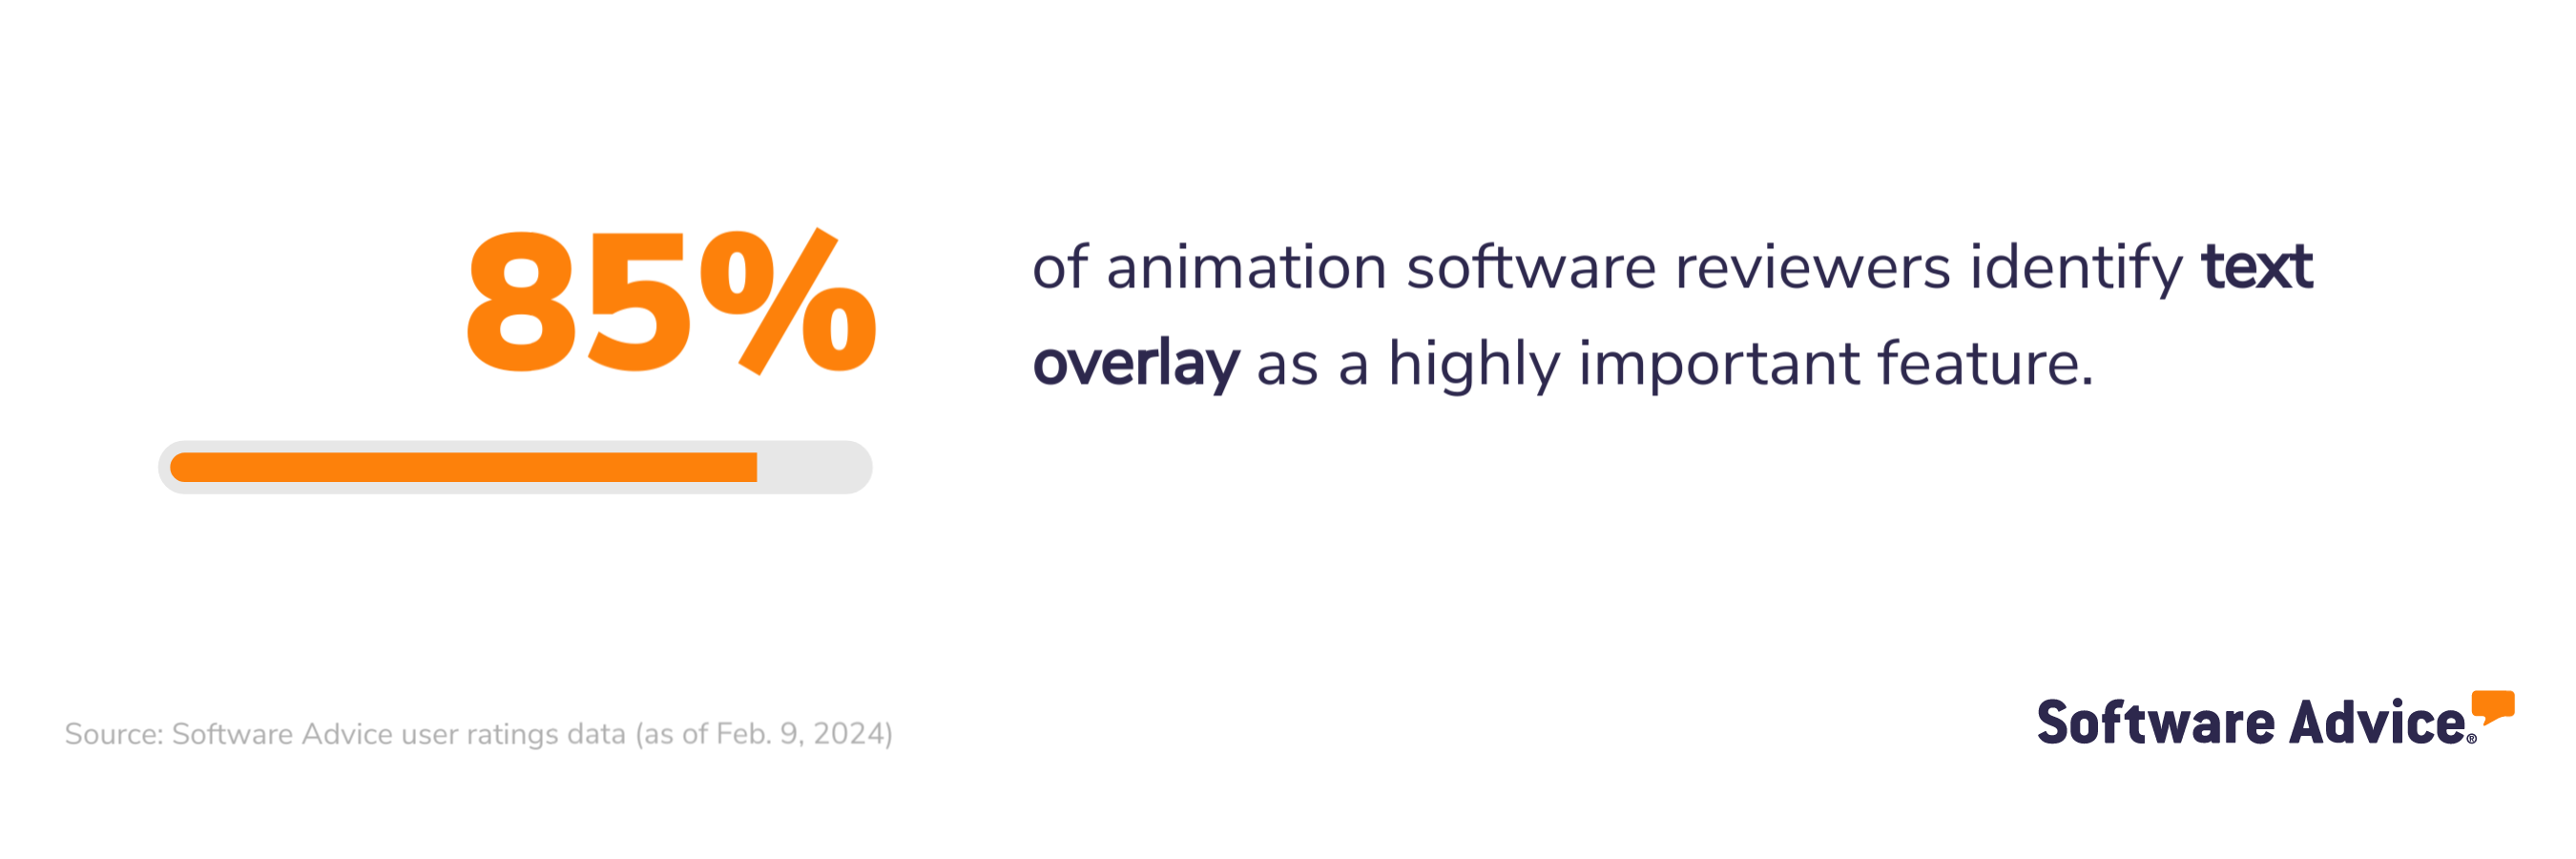 85% of animation software reviewers identify text overlay as a highly important feature